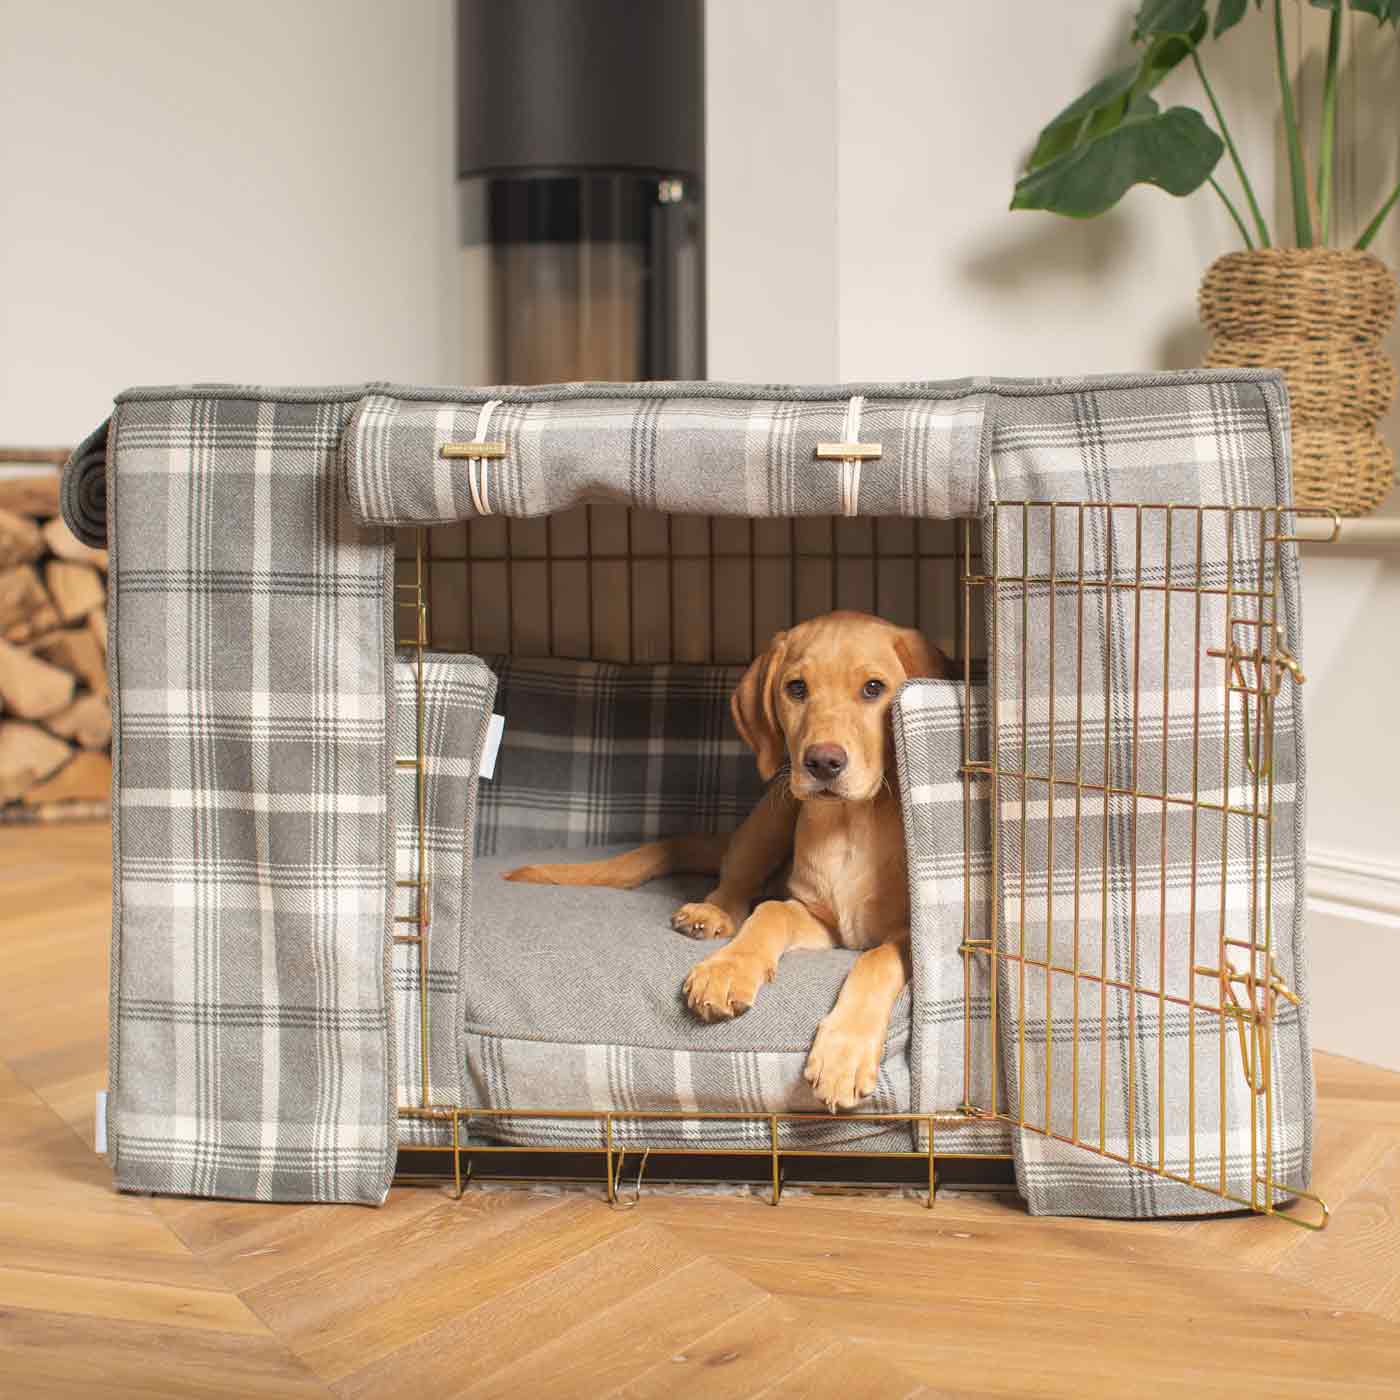 Luxury Heavy Duty Dog Cage, In Stunning Balmoral Dove Grey Tweed Cage Set, The Perfect Dog Cage Set For Building The Ultimate Pet Den! Dog Cage Cover Available To Personalize at Lords & Labradors US